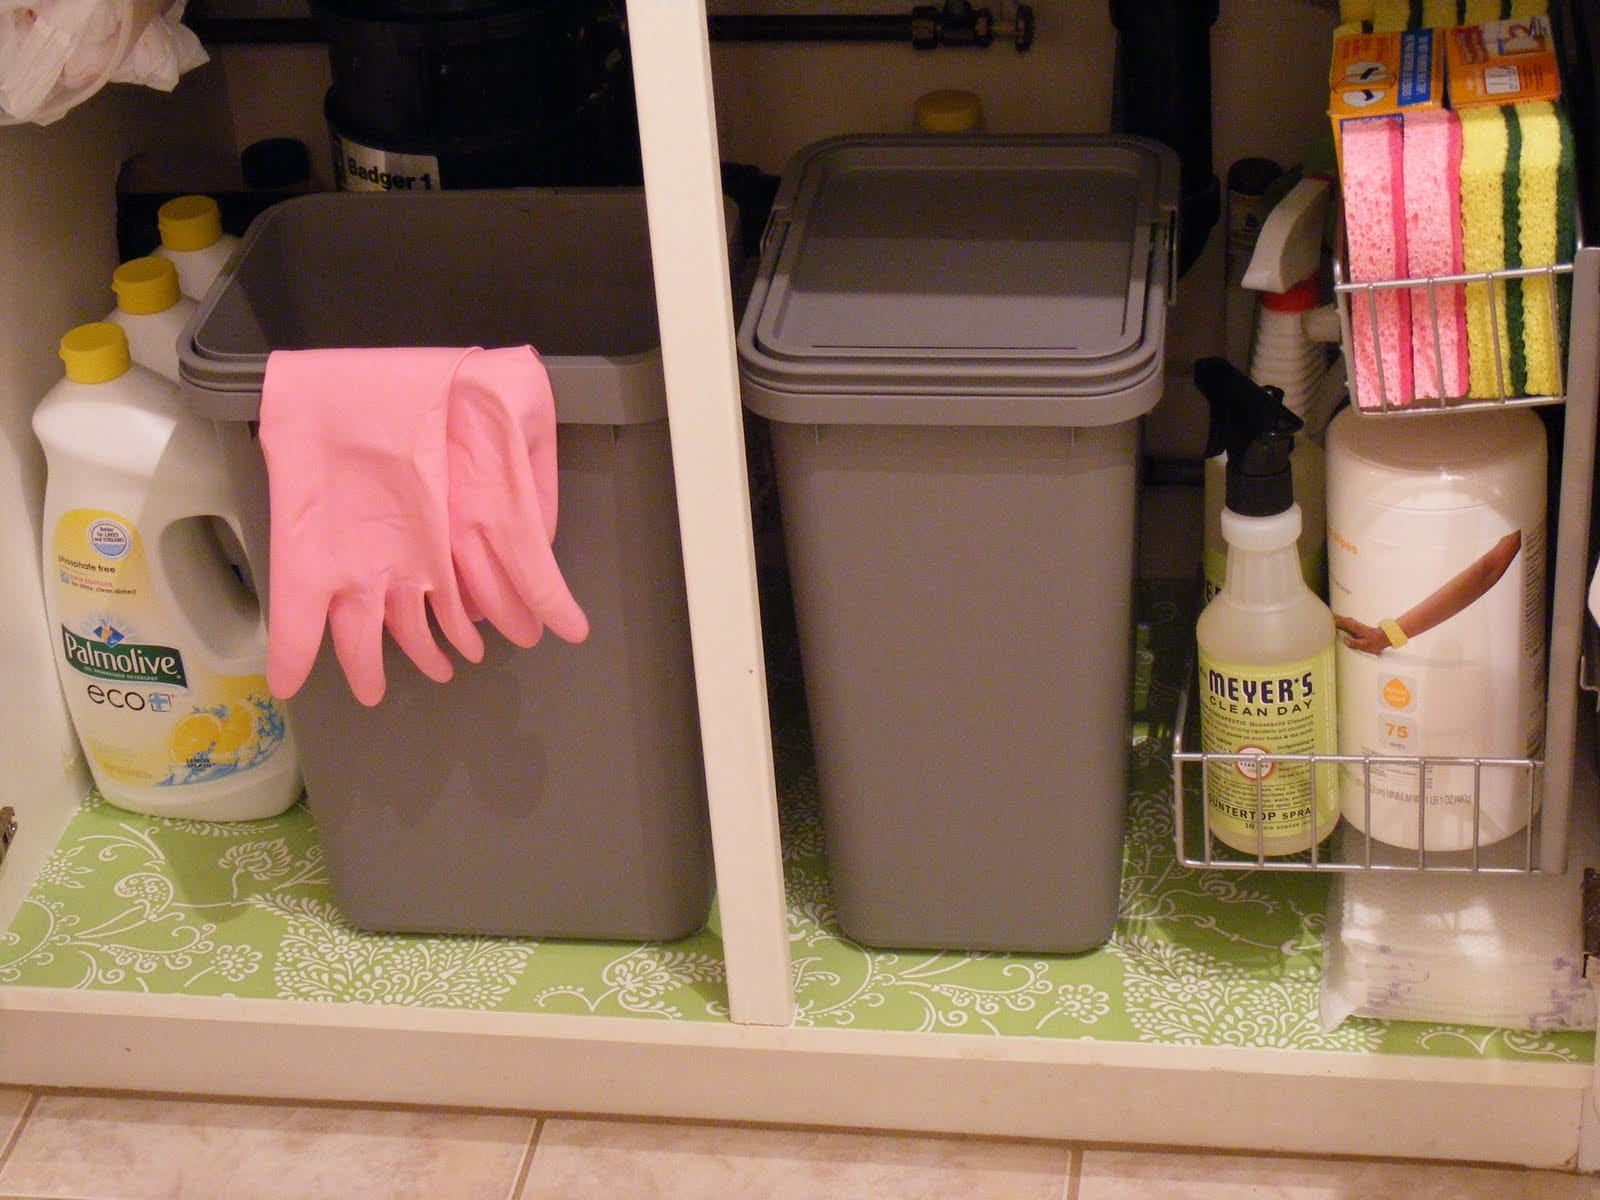 Under Kitchen Sink Organizers and Organizing Ideas - Clean and